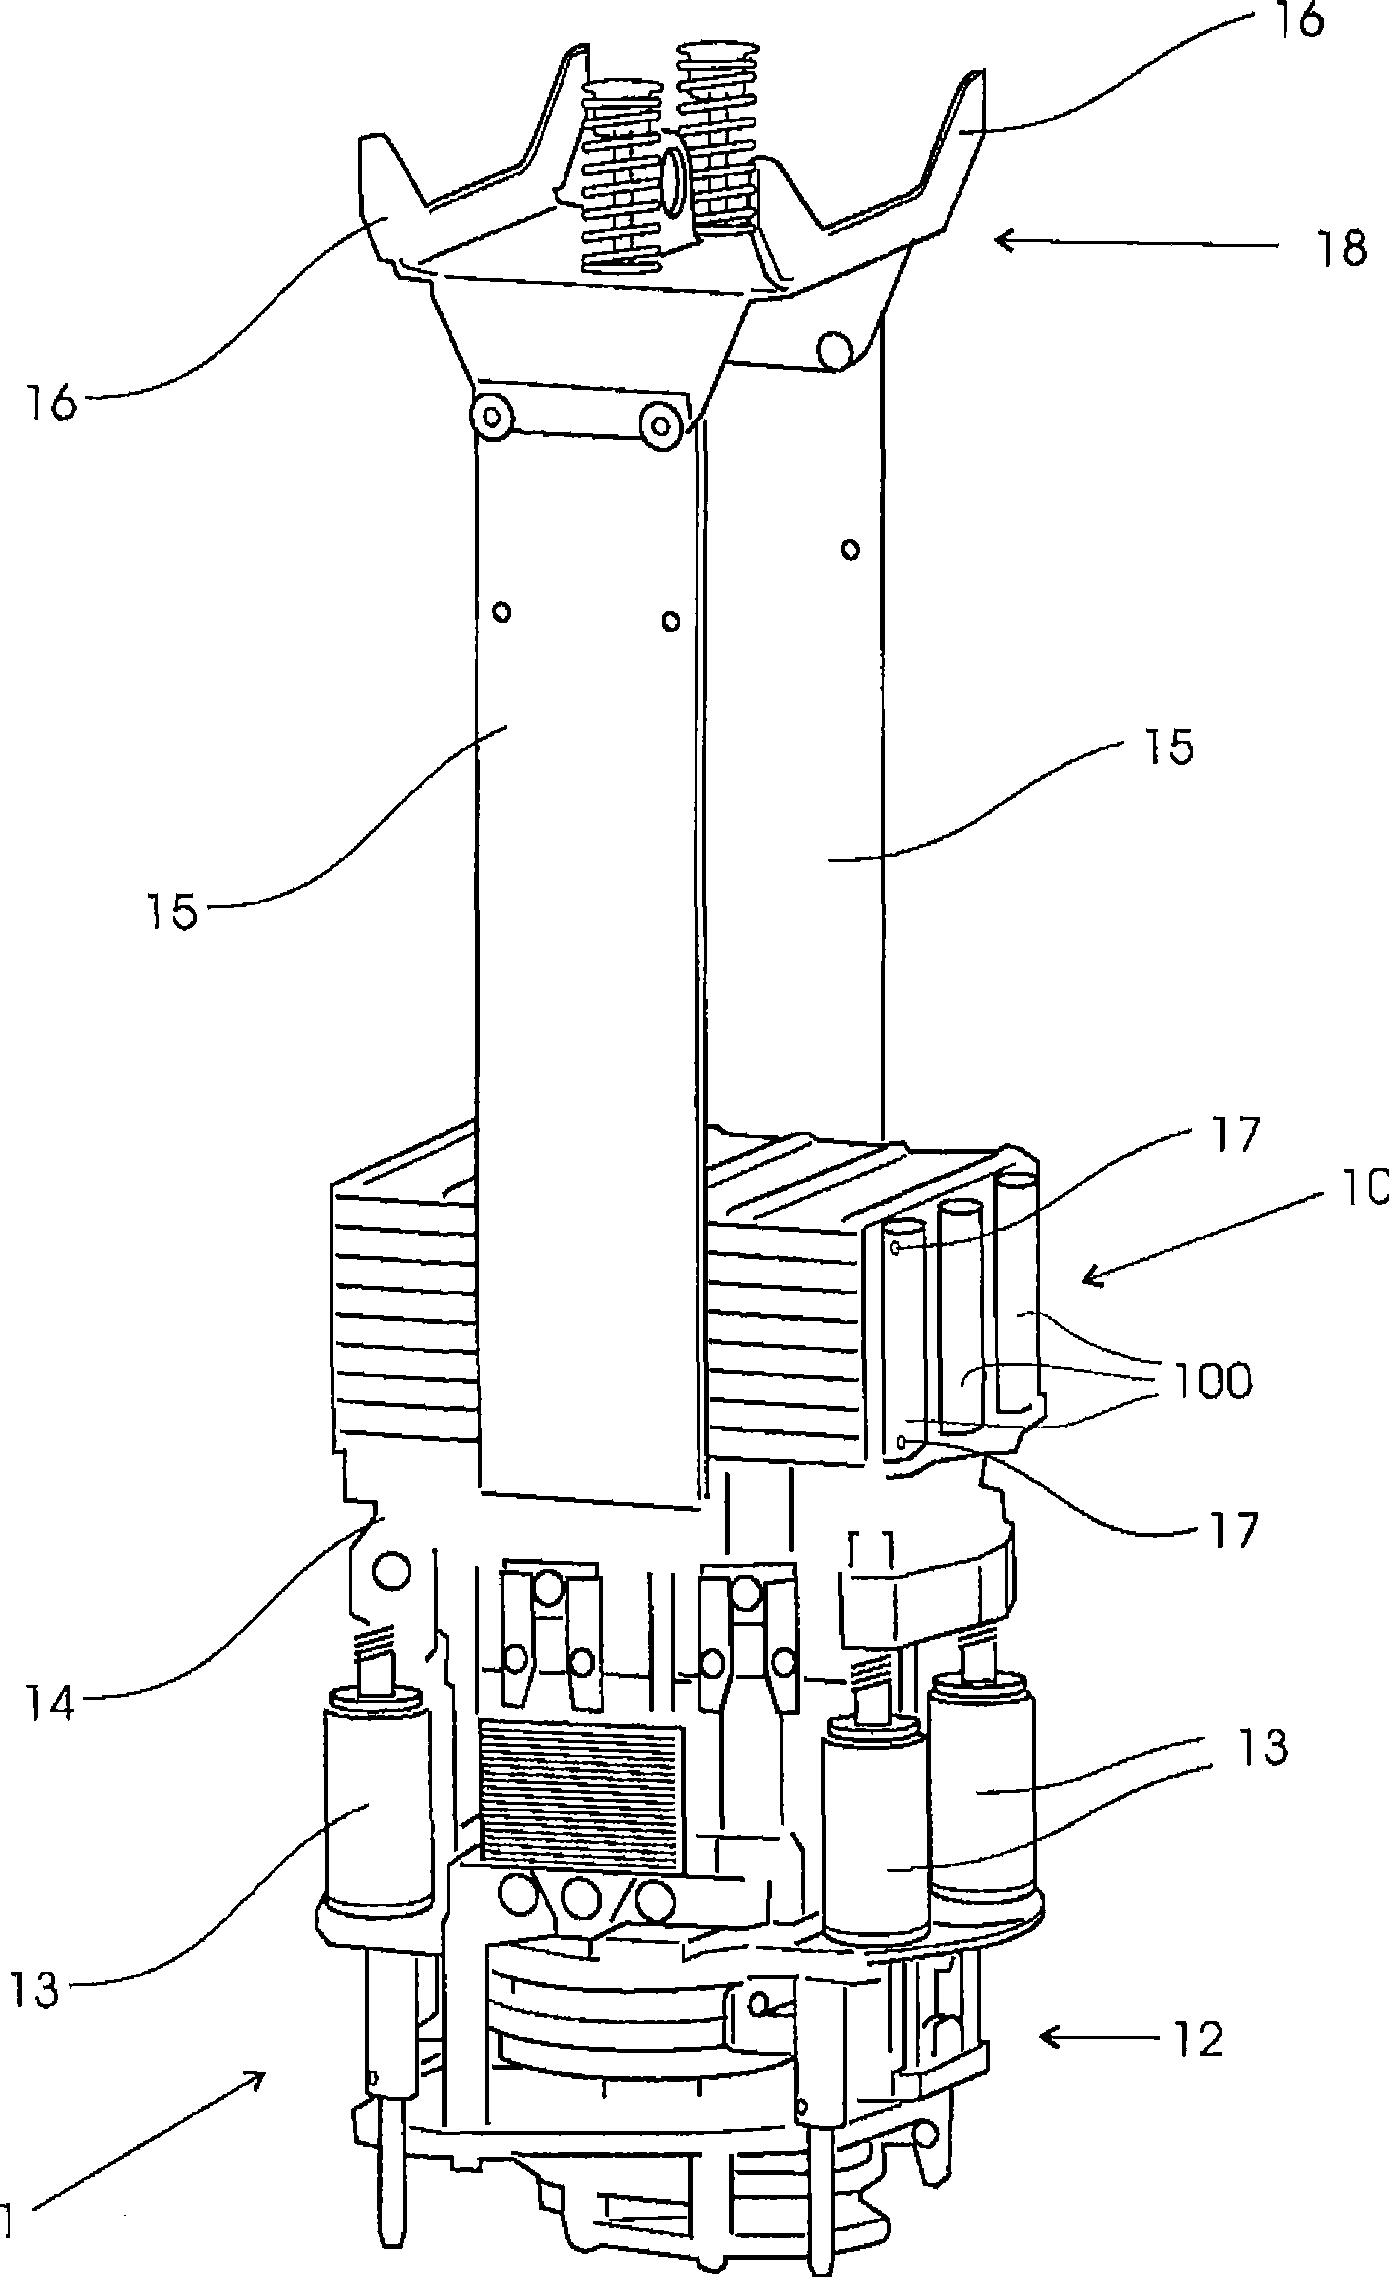 A resistor for electric high-voltage apparatus and a method of mounting a resistor